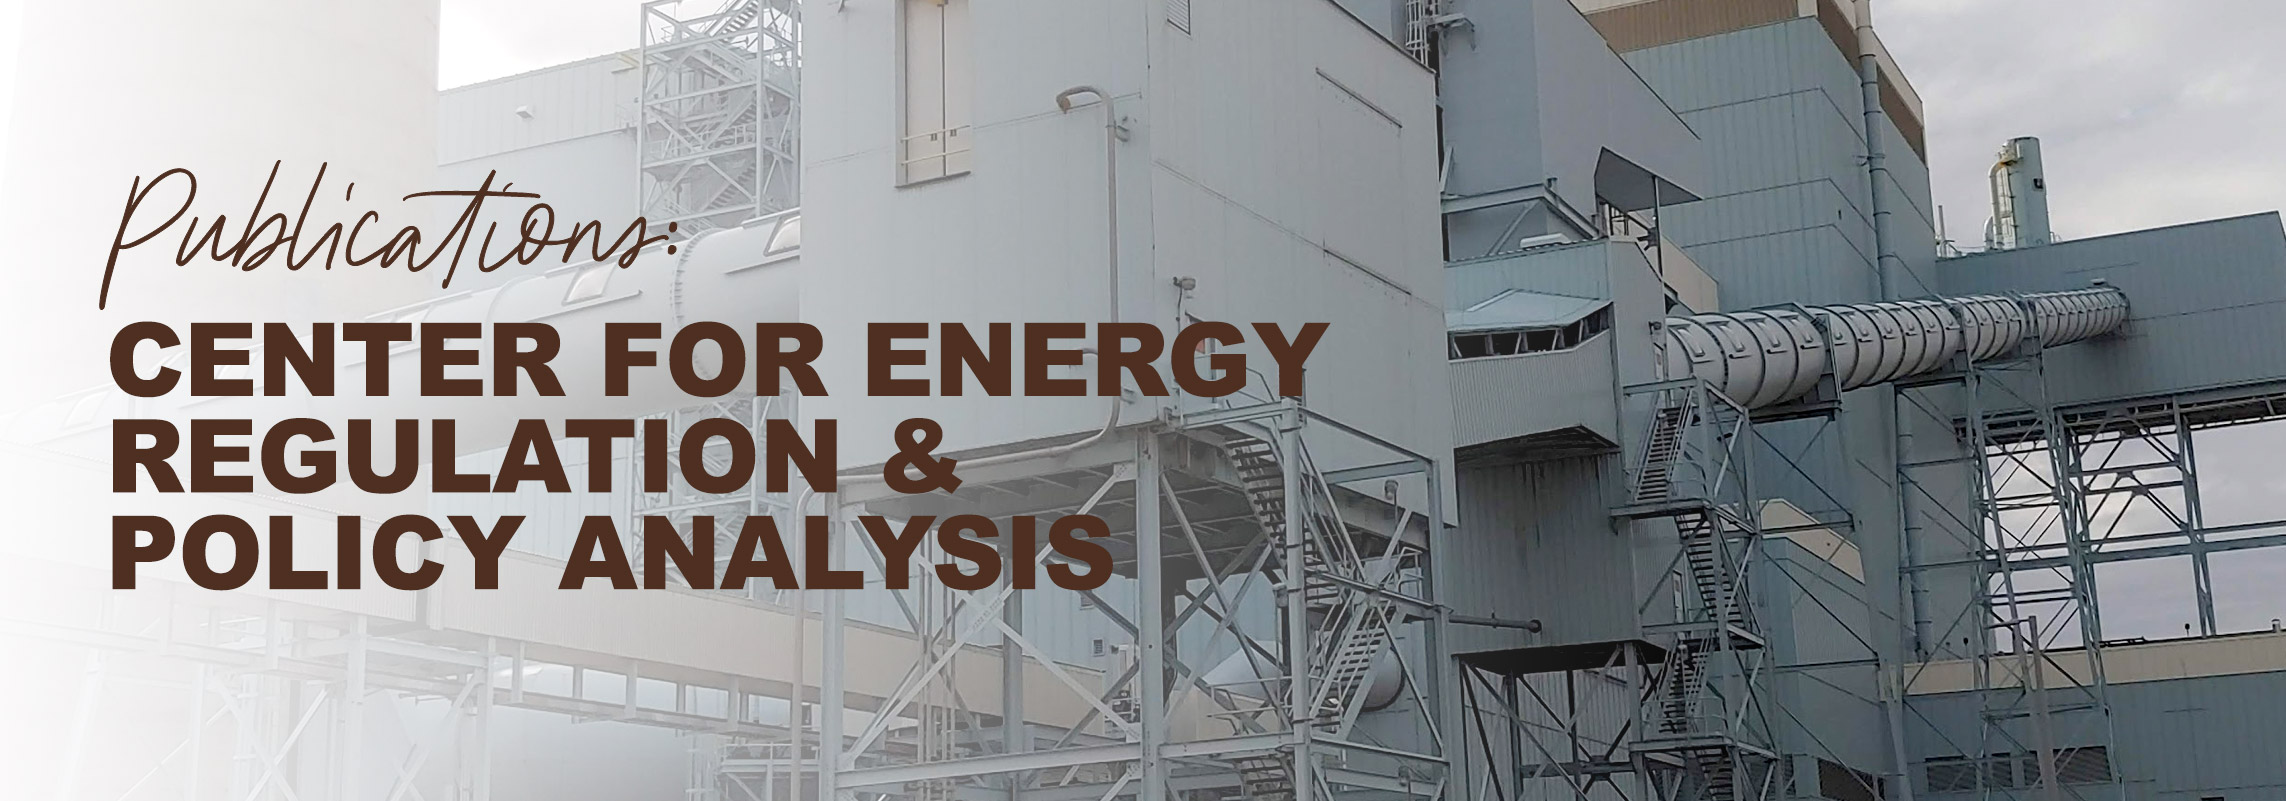 Publications: Center for Energy Regulation and Policy Analysis over power plant